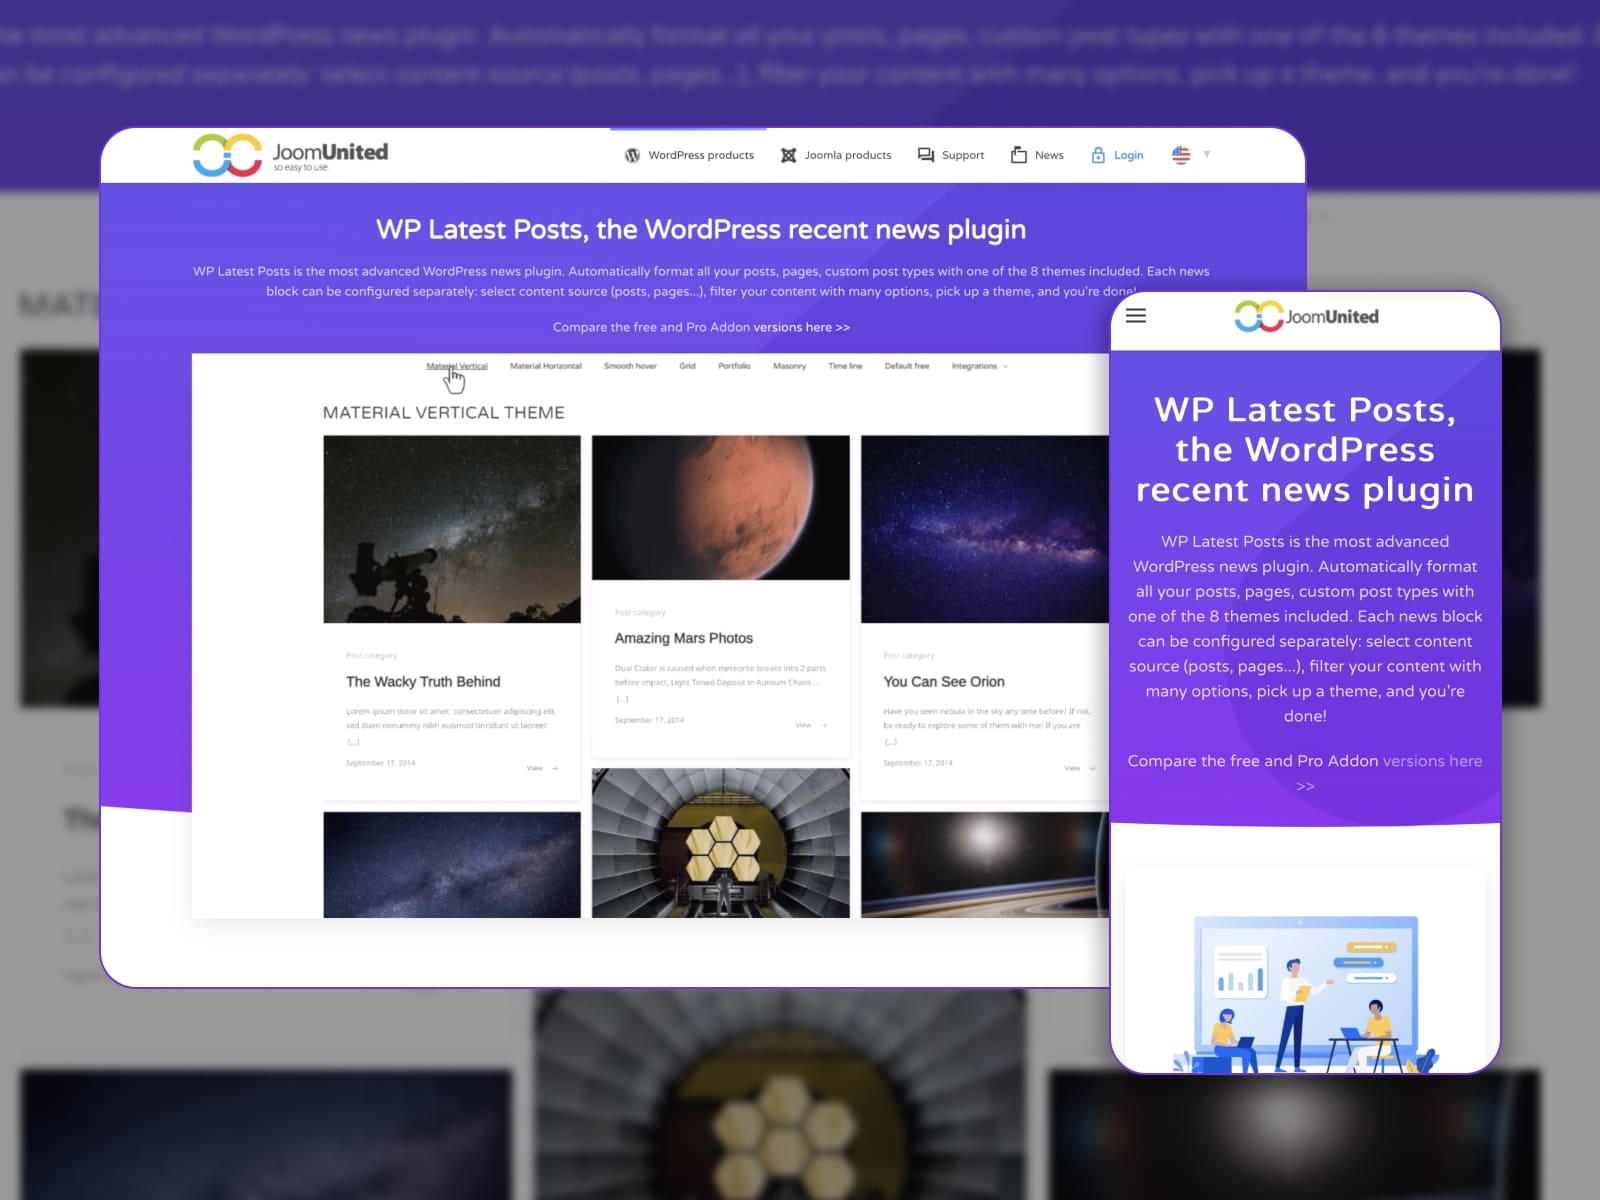 Collage of the WP Latest Posts recent news WordPress plugin homepage made in violet and white colors.